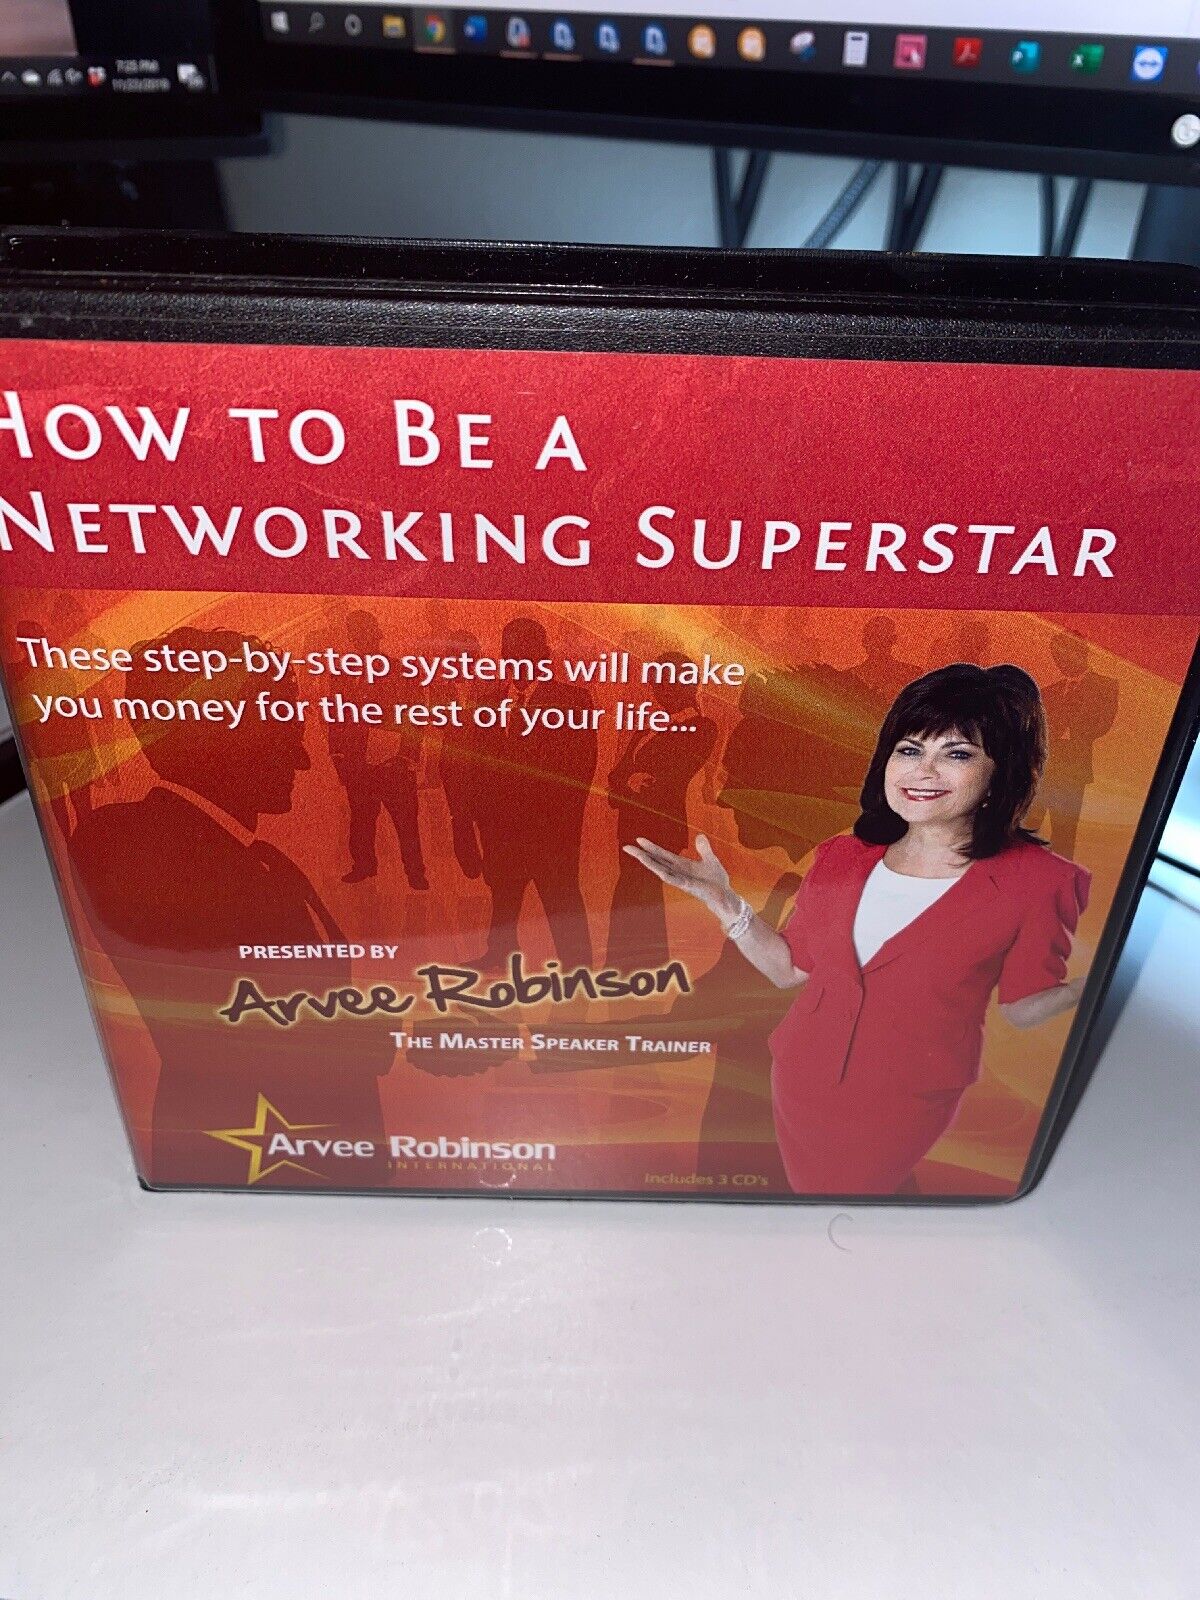 How To Be A Networking Superstar - Arvee Robinson 3 Cd Set